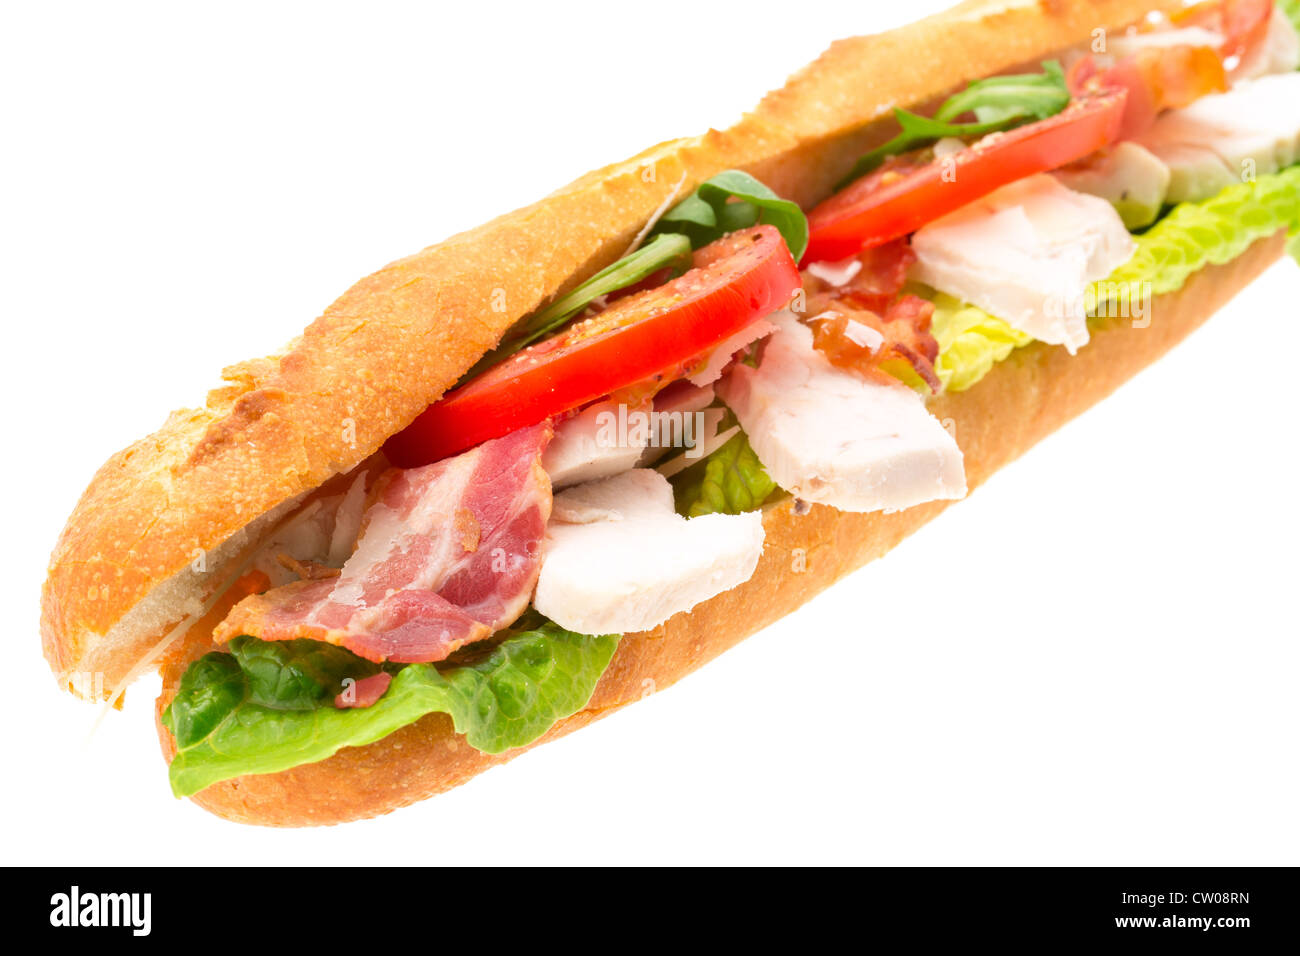 Chicken, bacon and salad filled baguette served on a white plate - studio shot with a white background Stock Photo